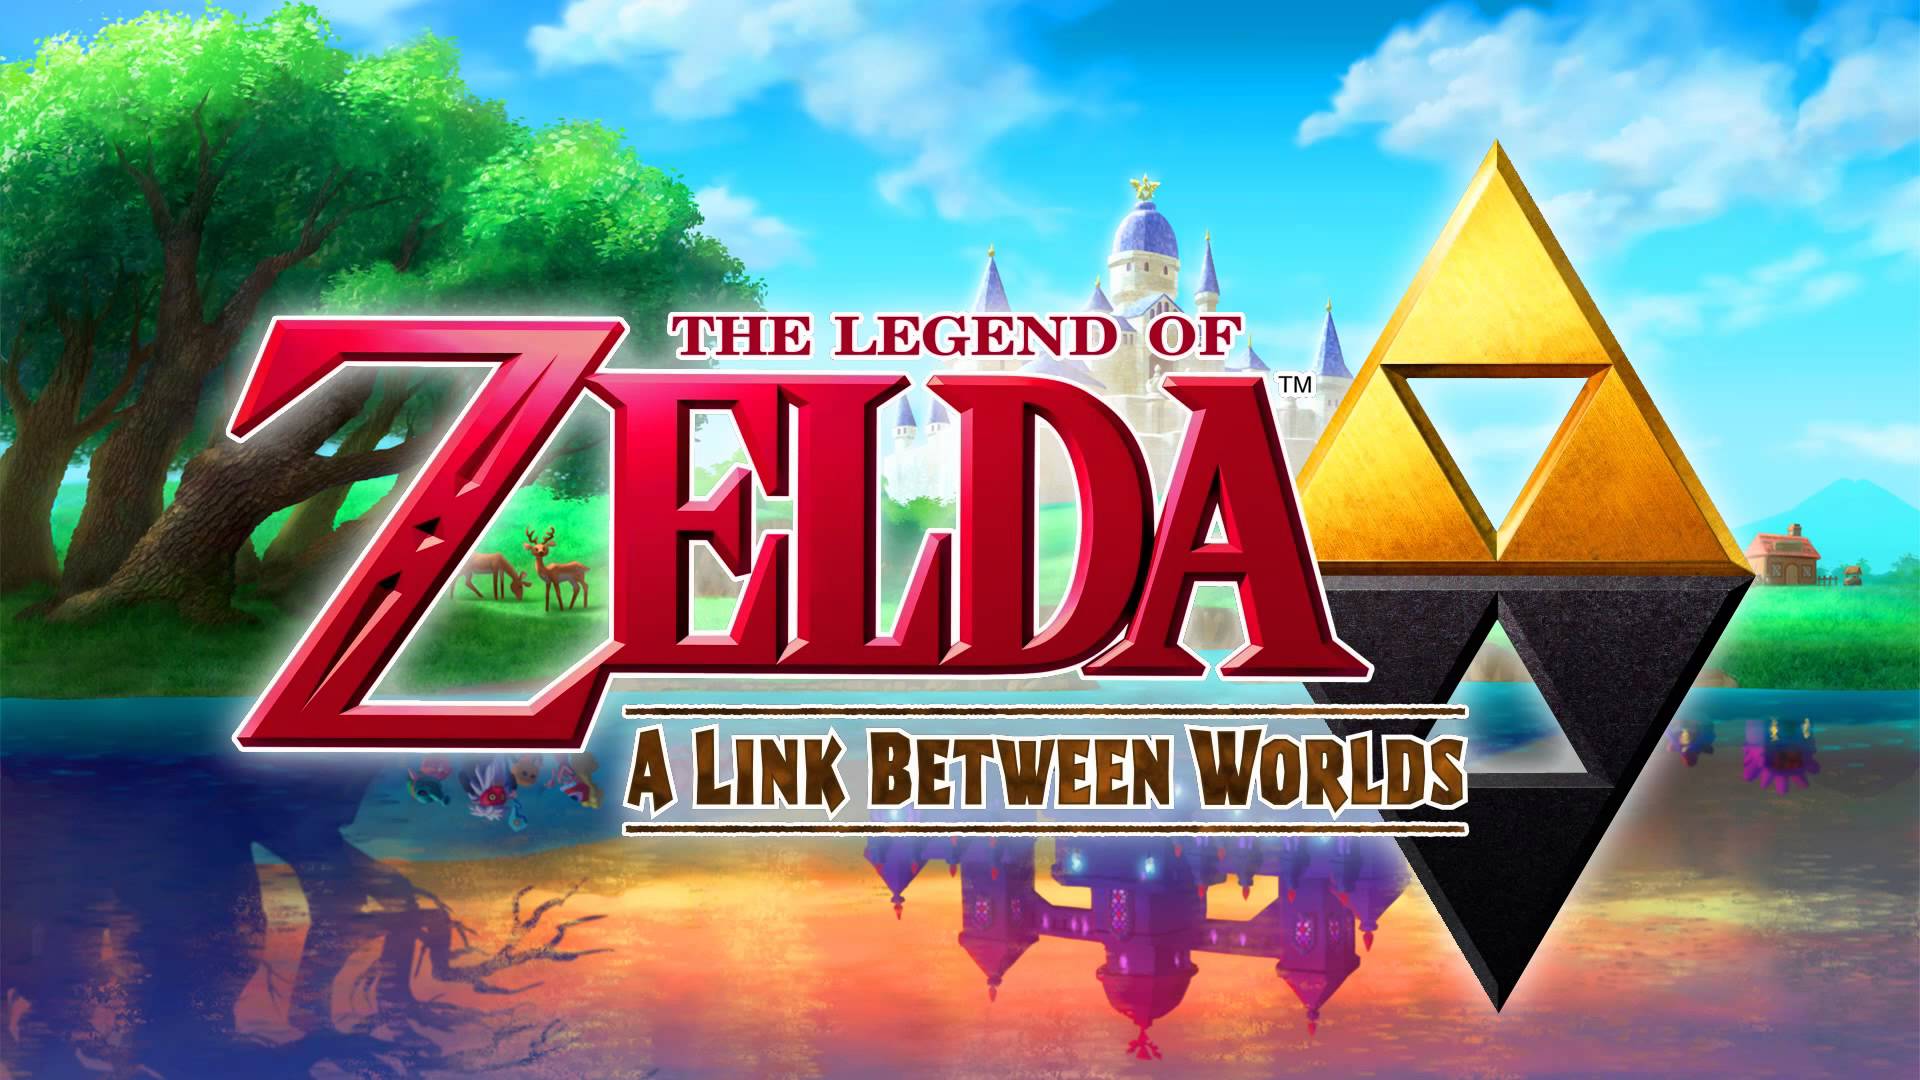 The Legend Of Zelda: A Link Between Worlds Backgrounds, Compatible - PC, Mobile, Gadgets| 1920x1080 px